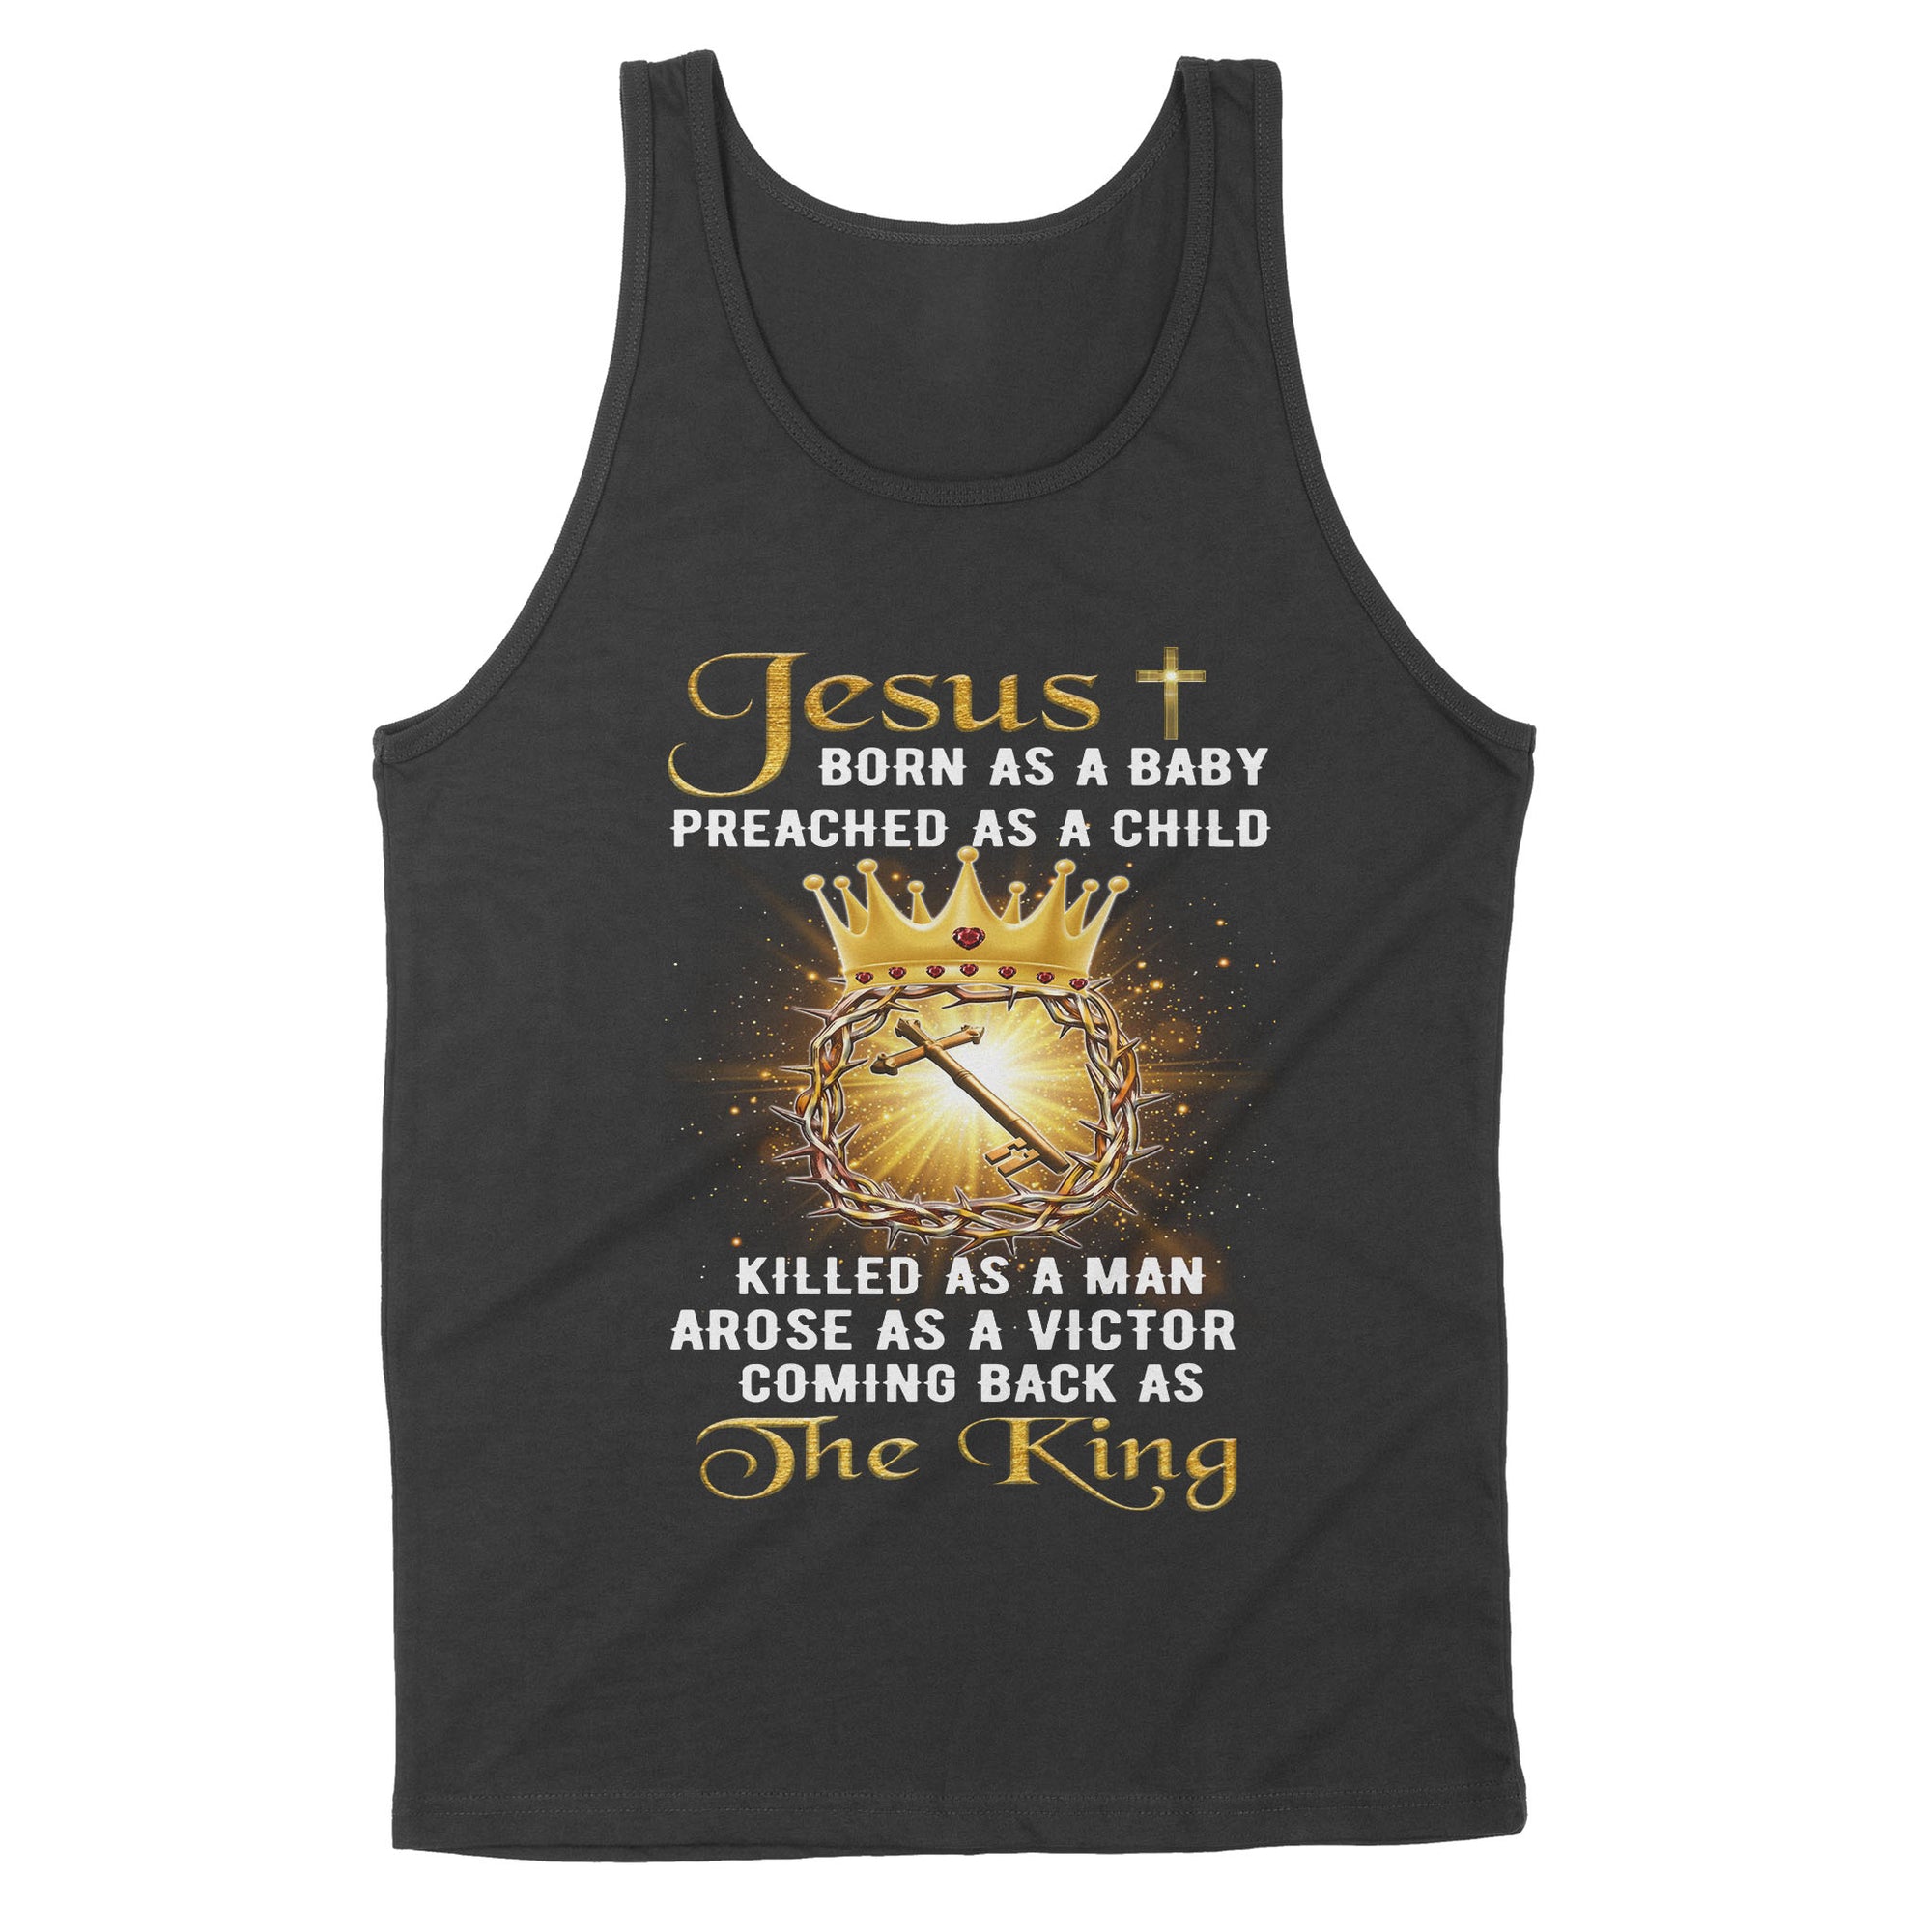 Premium Tank - Jesus Born As A Baby Preached As A Child Coming Back As The King